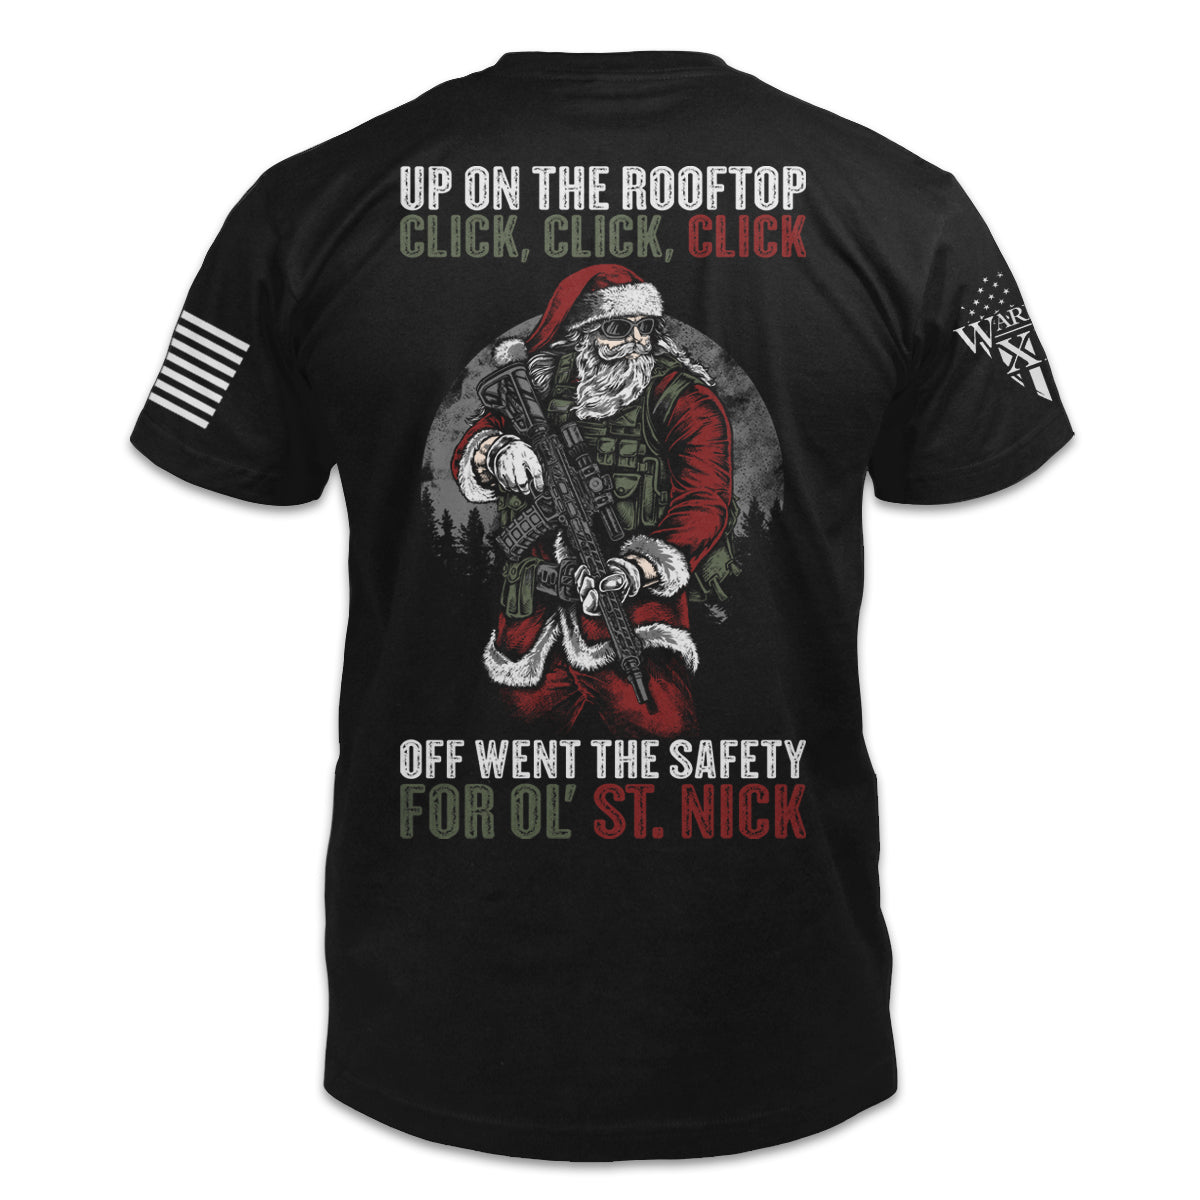 A black t-shirt with the words "Up on the rooftop, click, click, click. Off went the safety for ol' St. Nick" with Santa holding a gun printed on the back of the  shirt.